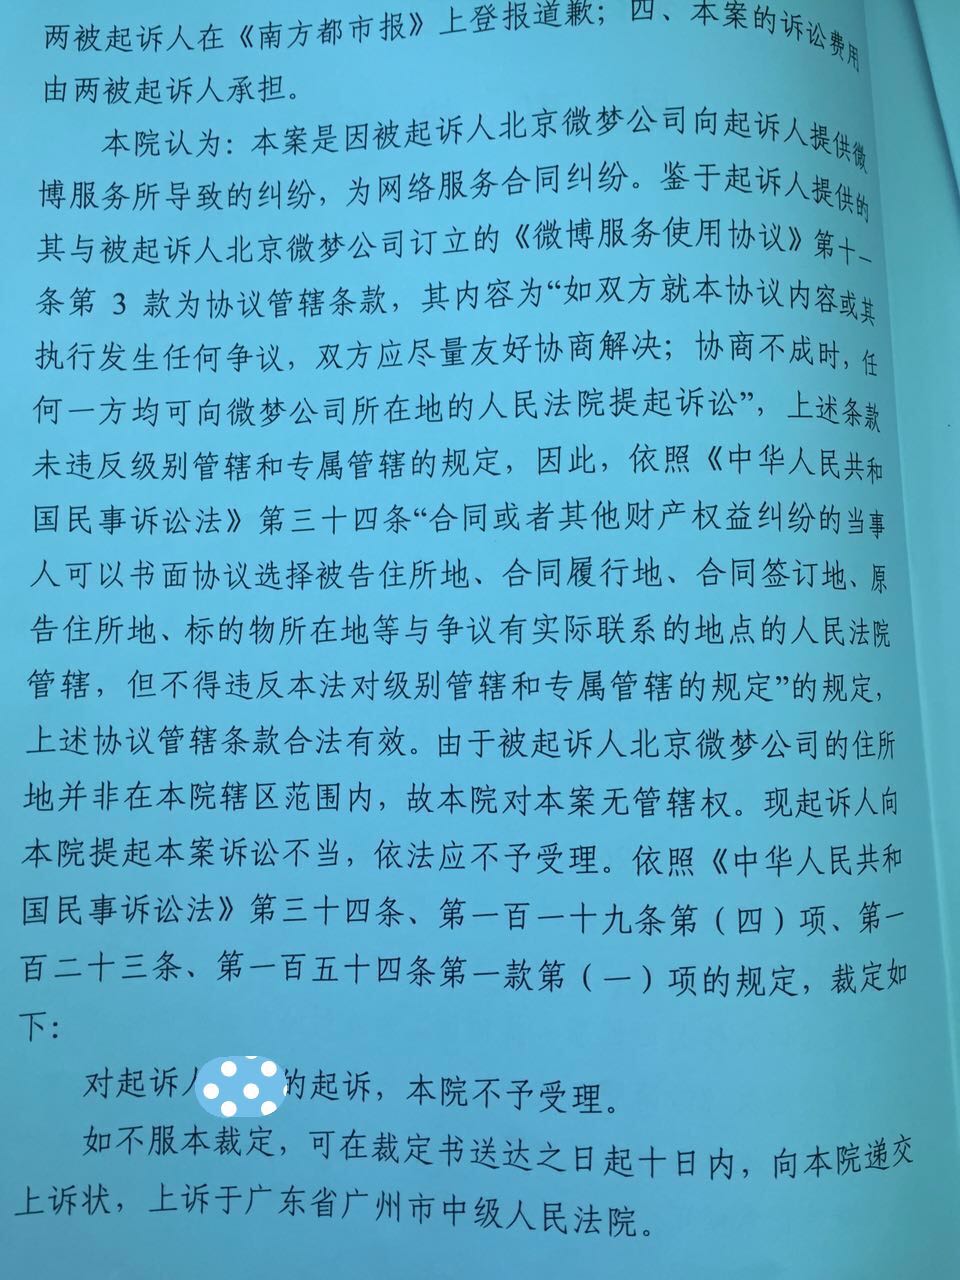 Civil ruling by Guangzhou Tianhe District People’s Court (page 2)